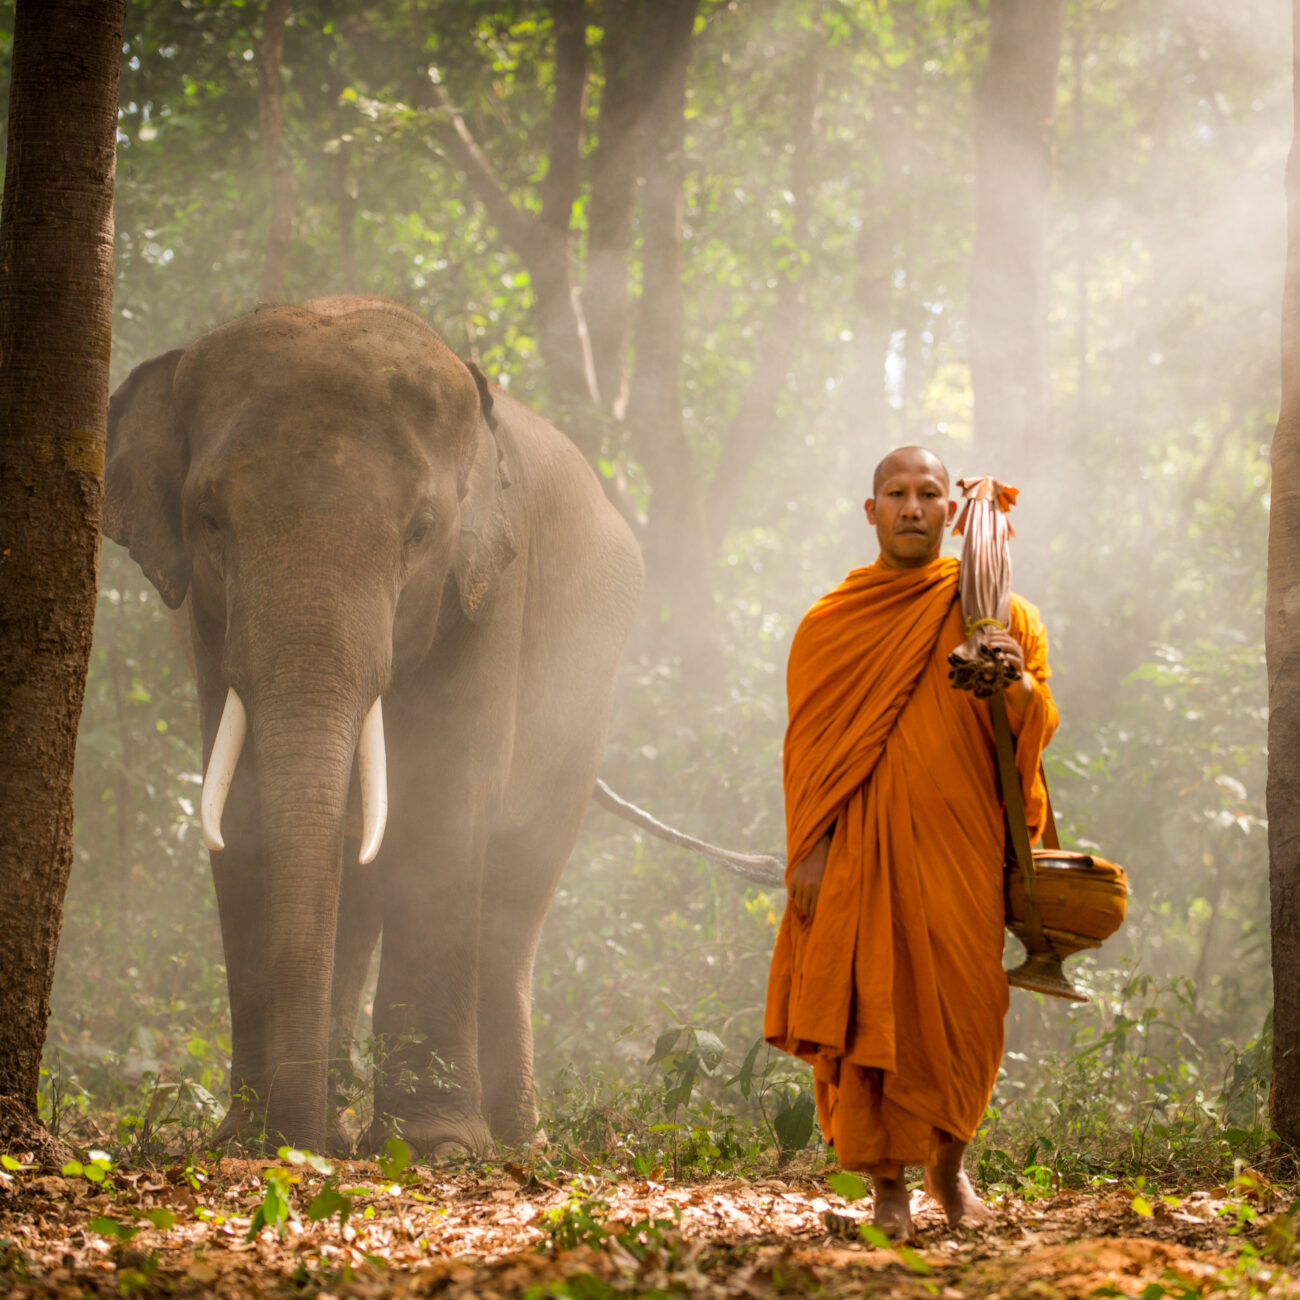 Elephant and Buddist monch in asian countryside in Thailand - Thai elephant in Surin region